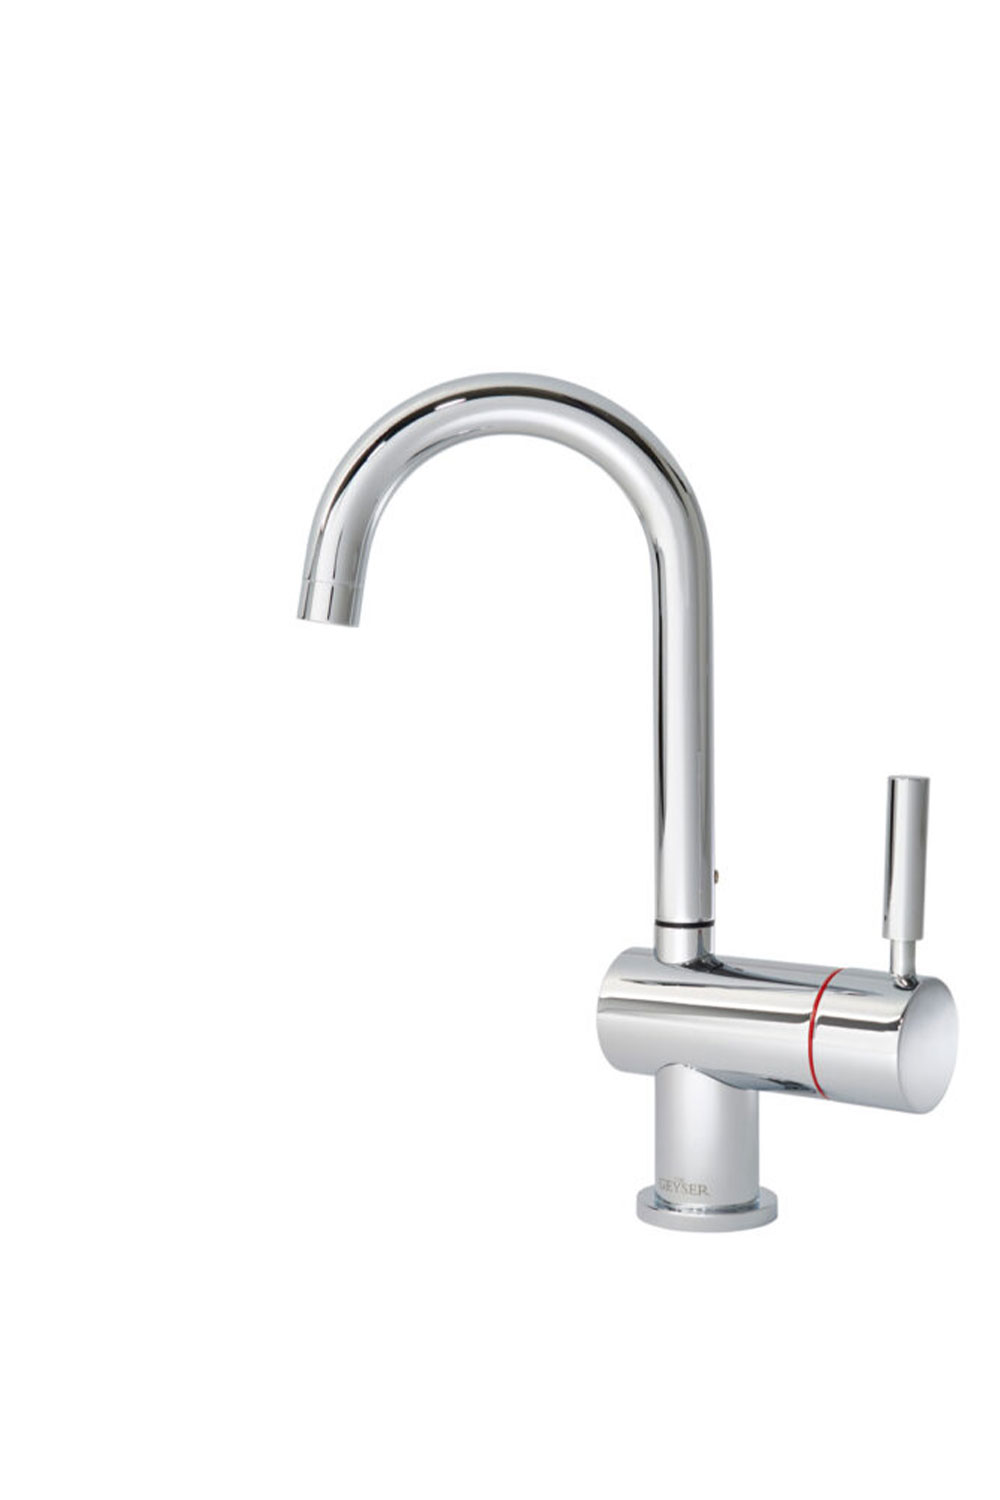 Geyser Direct Instant Hot Water Tap